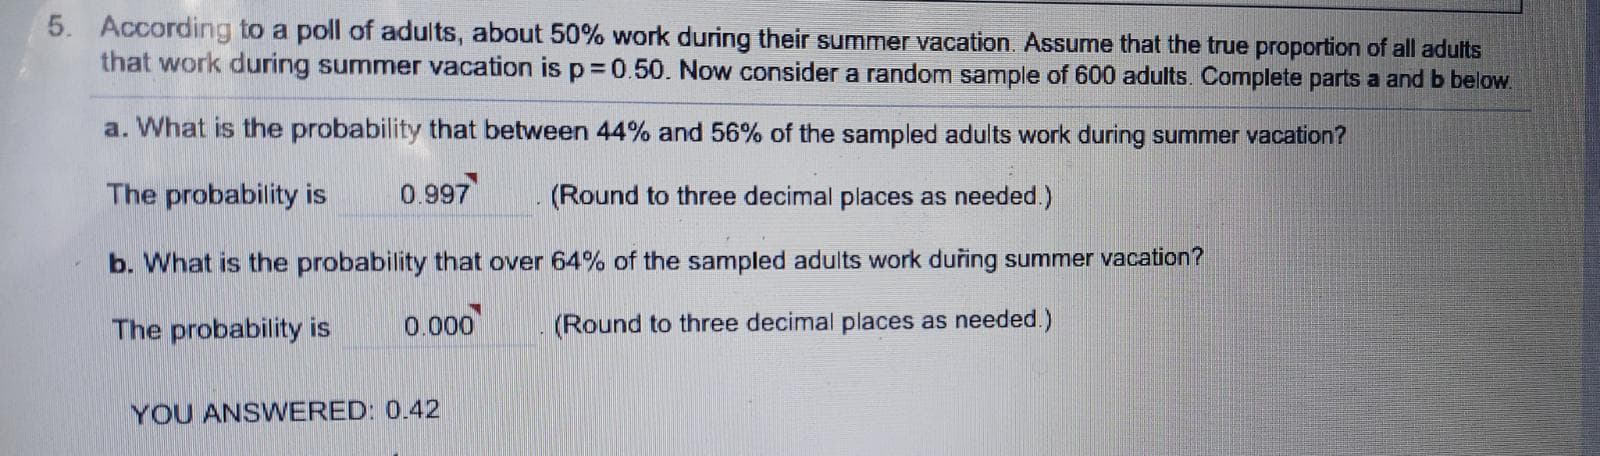 5. According to a poll of adults, about 50% work during their summer vacation. Assume that the true proportion of all adults
that work during summer vacation is p= 0.50. Now consider a random sample of 600 adults. Complete parts a and b below.
a. What is the probability that between 44% and 56% of the sampled adults work during summer vacation?
The probability is
0.997
(Round to three decimal places as needed.)
b. What is the probability that over 64% of the sampled adults work duřing summer vacation?
The probability is
0.000
(Round to three decimal places as needed.)
YOU ANSWERED: 0.42
